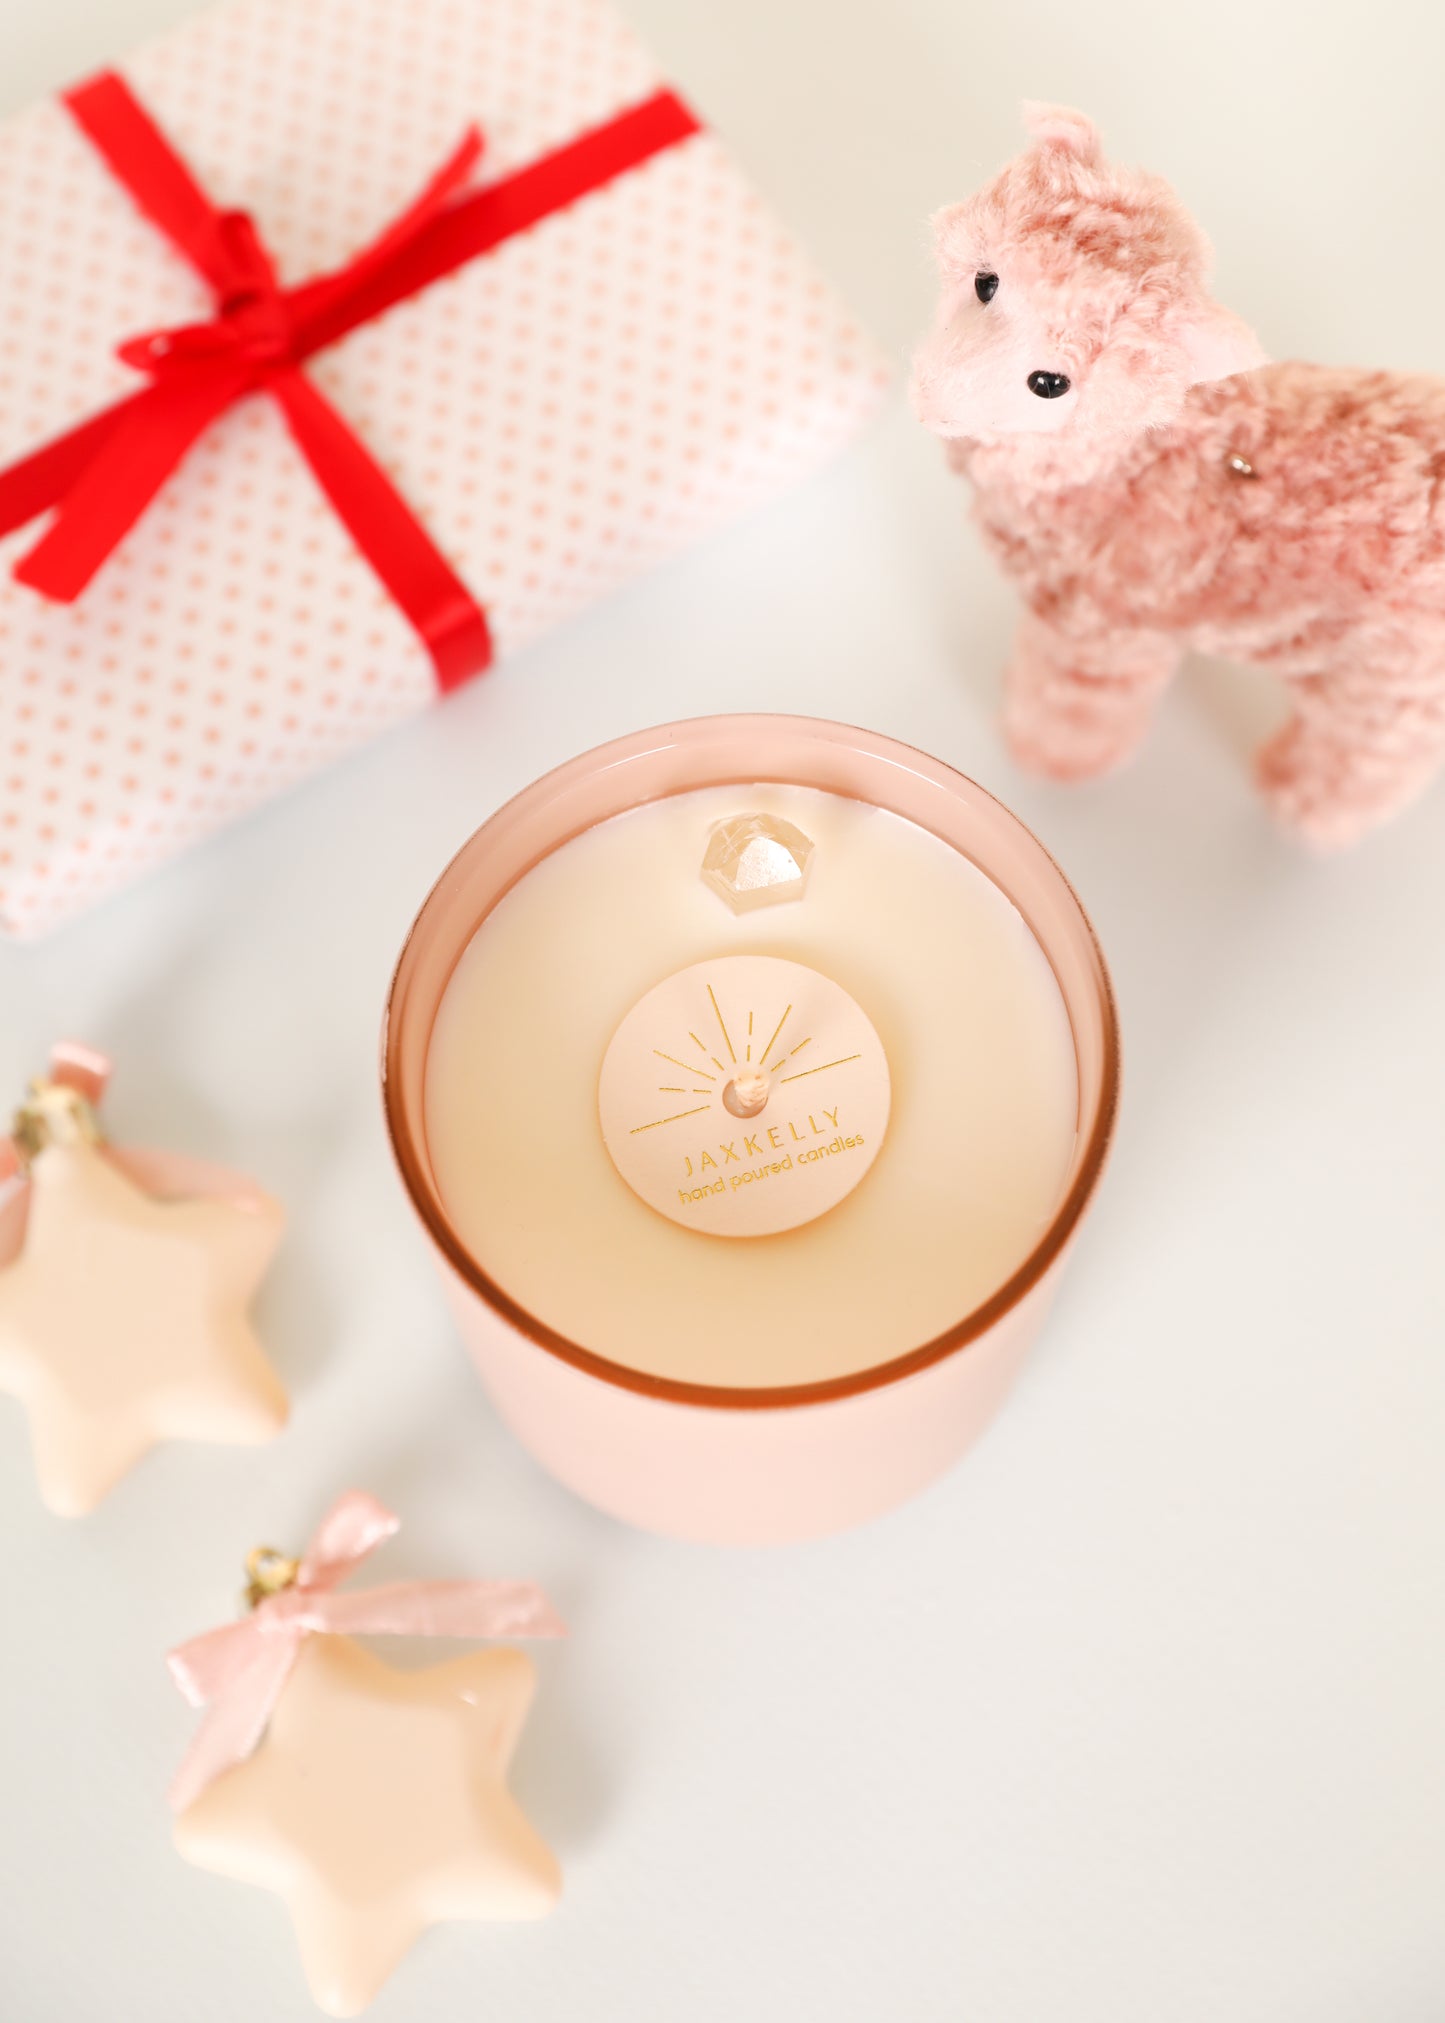 8 oz - Pink Winter Candle – JaxKelly